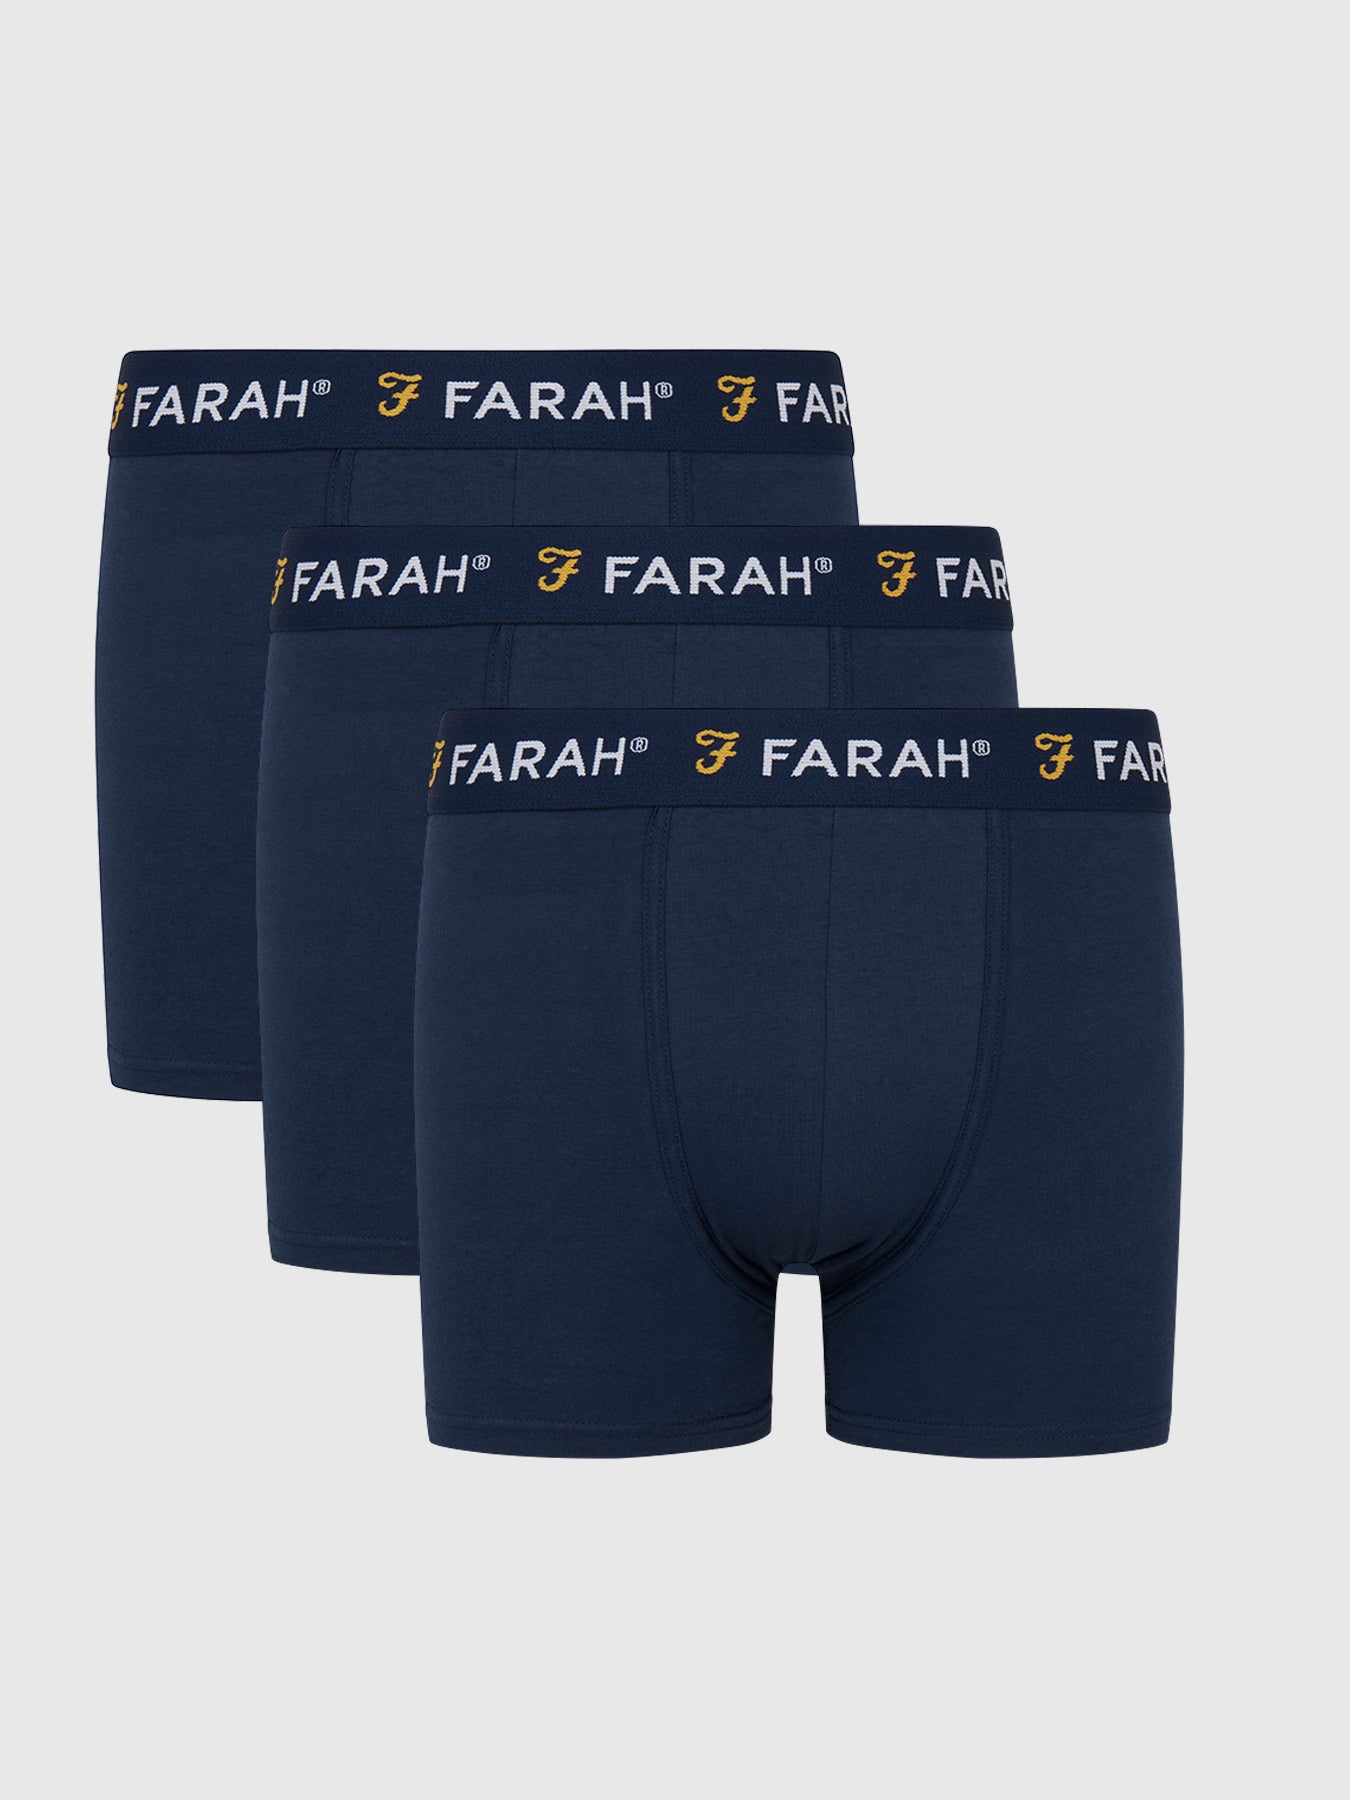 View Koman 3 Pack Boxers In Navy information